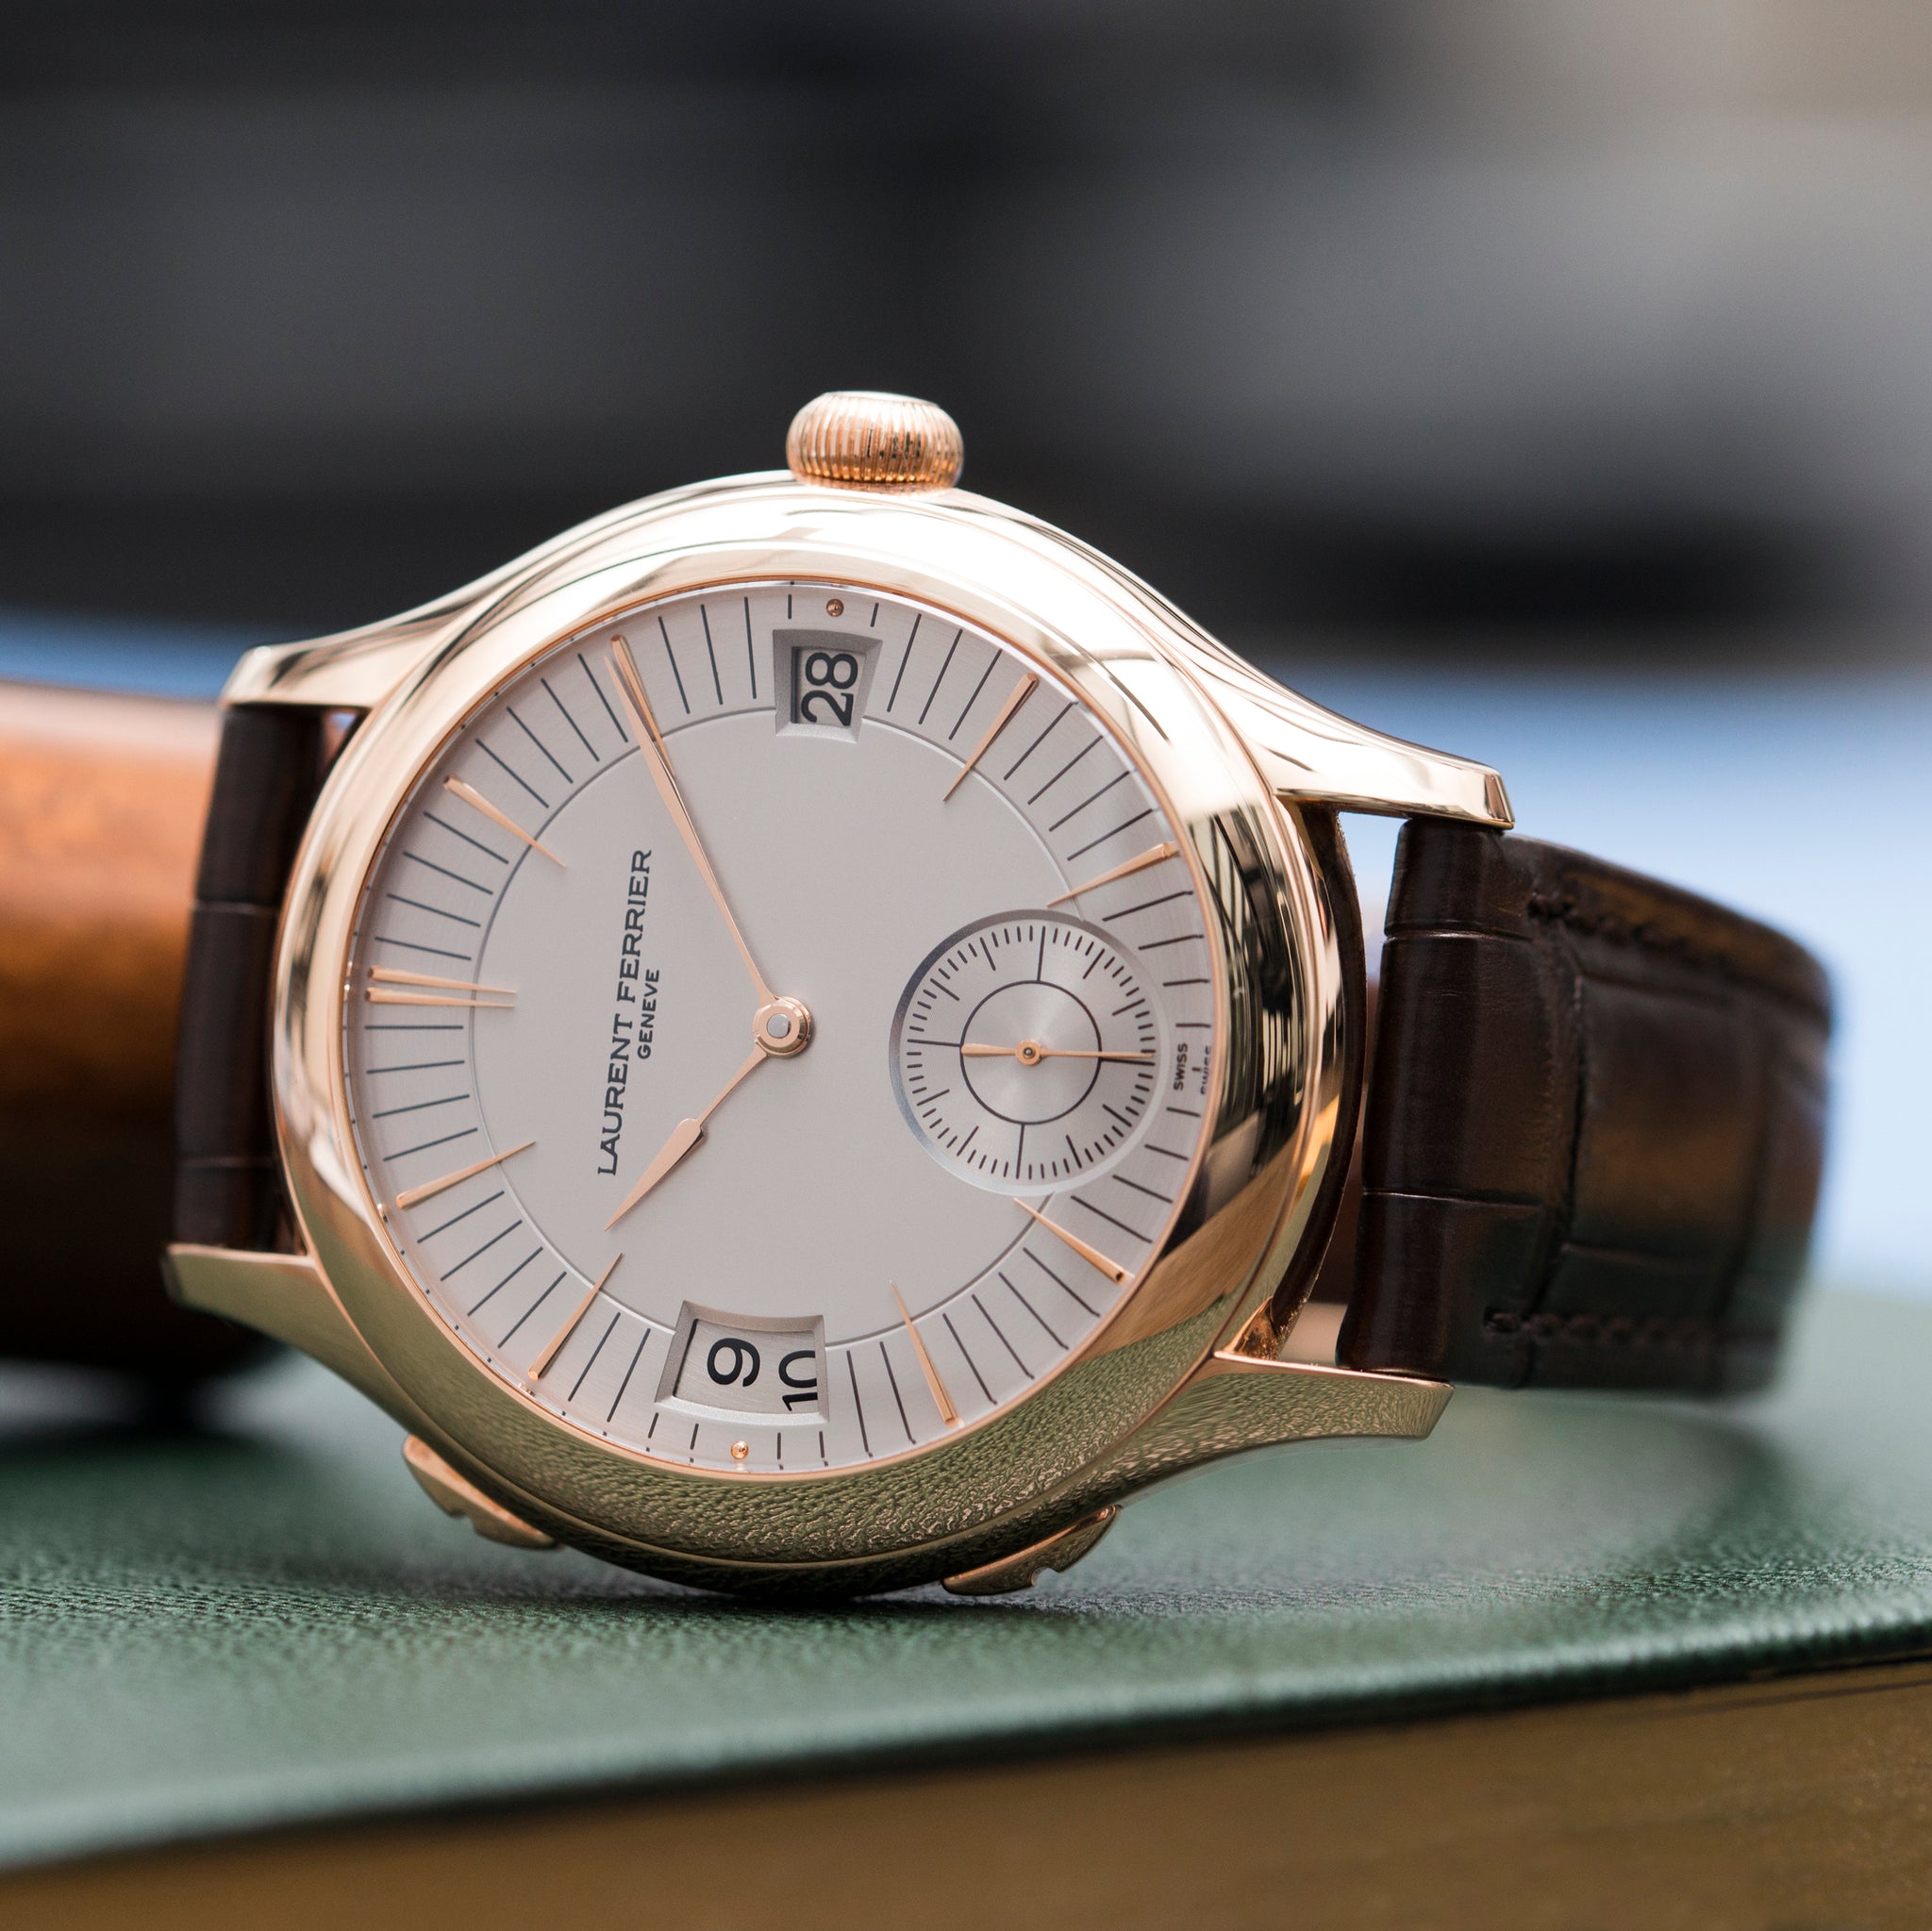 best traveller watch Laurent Ferrier Galet Traveller Micro Rotor LF 230.01 rose gold watch additional prototype dial for sale online at A Collected Man London UK approved reseller of preowned independent watchmakers